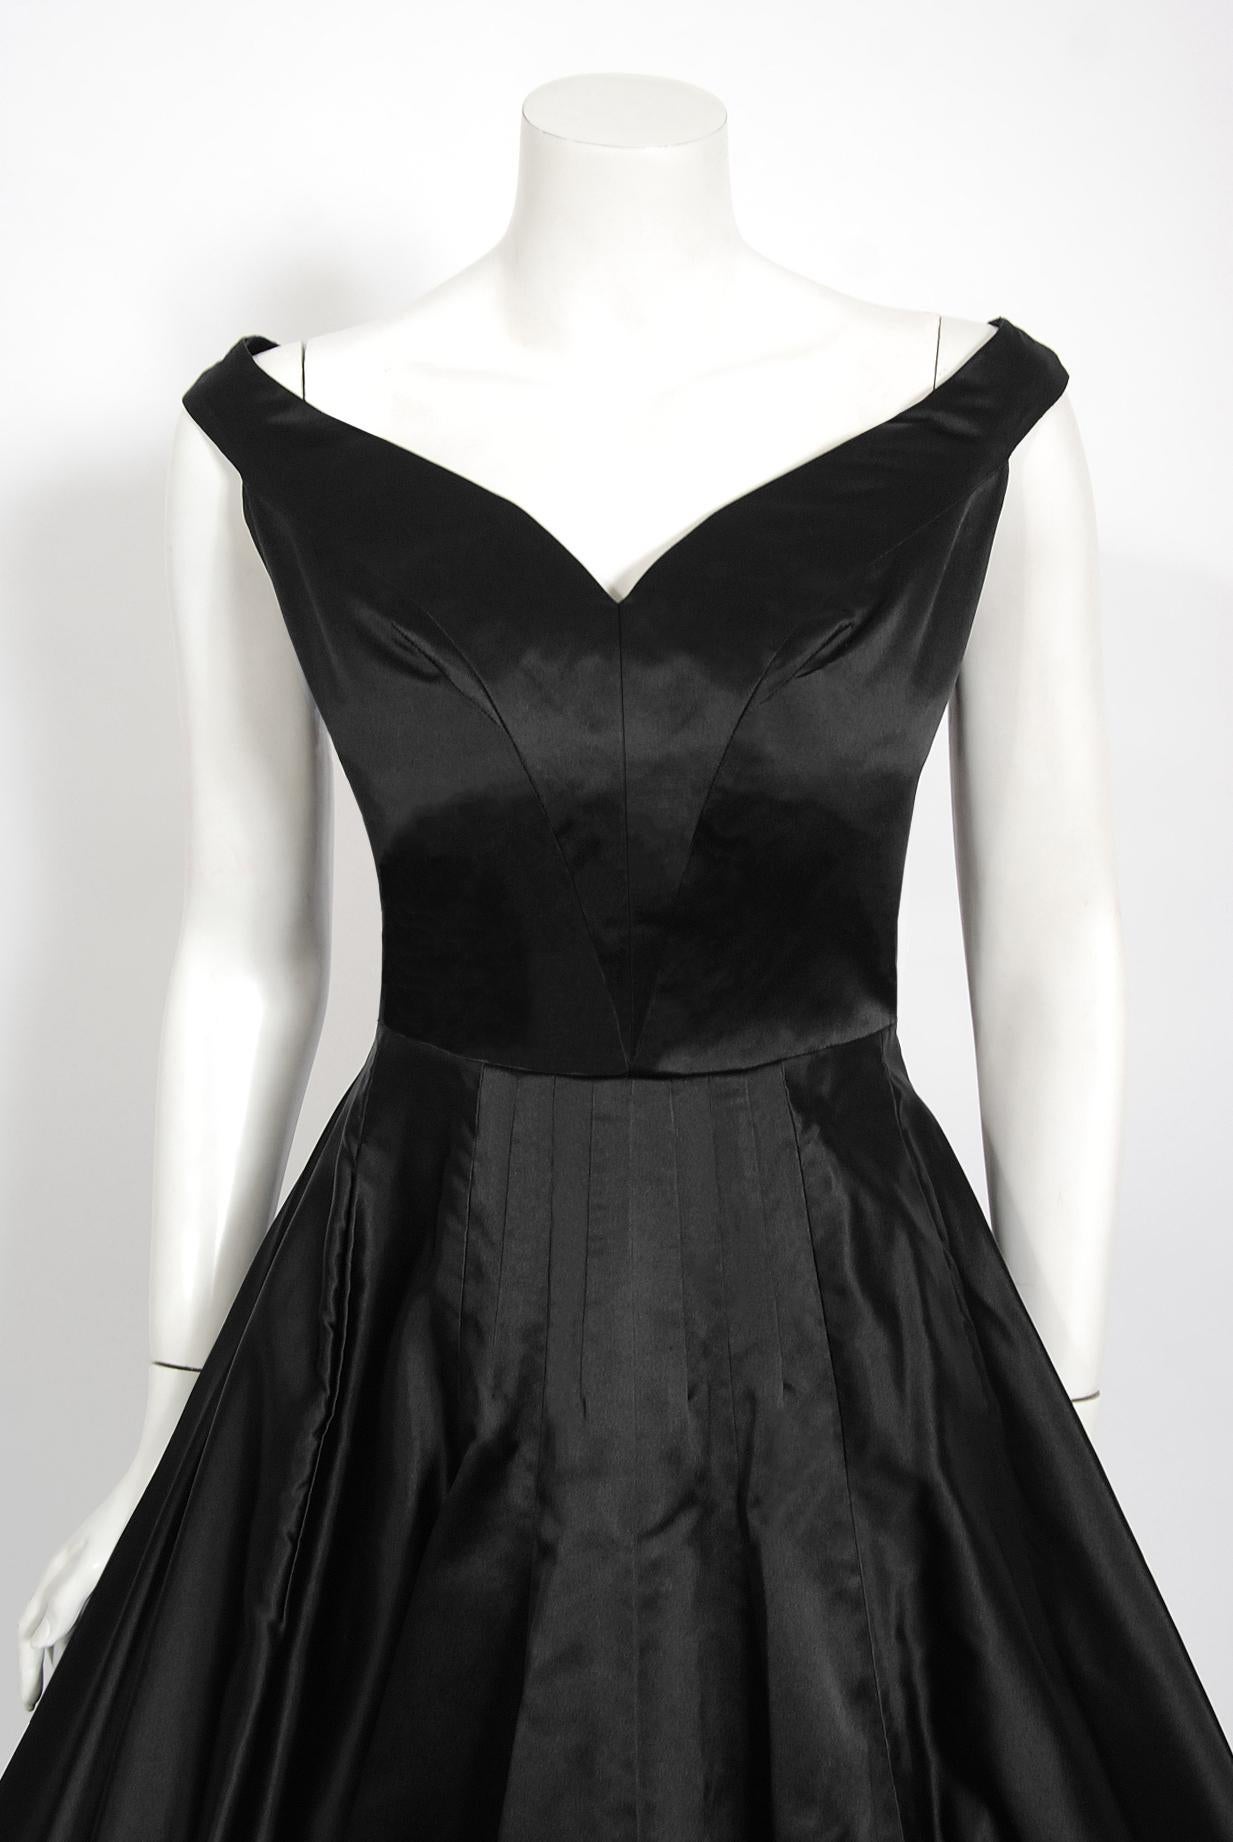 A gorgeous and rare Jame Galanos Couture black silk-satin dress dating back to the mid 1950's. Dedication to excellence in craftsmanship was the foundation of James Galanos' career. The quality of workmanship found in his clothing is unsurpassed in